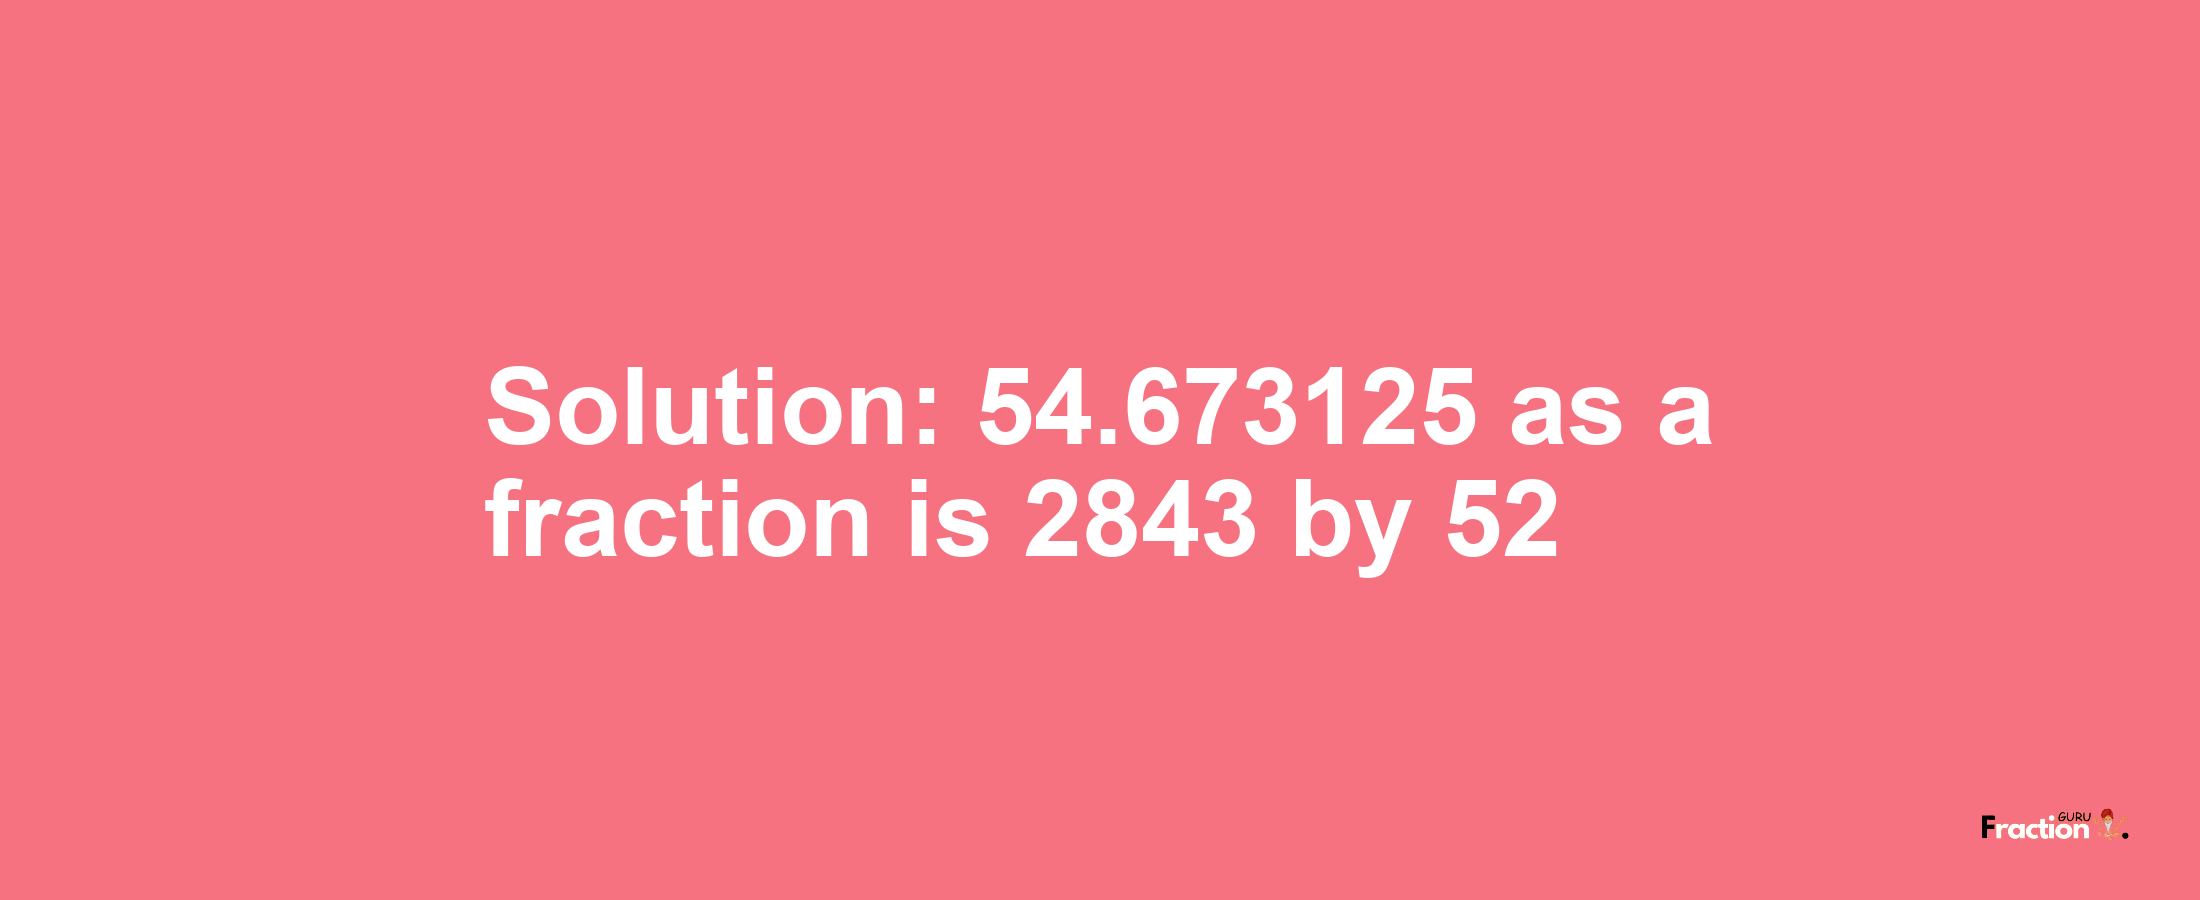 Solution:54.673125 as a fraction is 2843/52